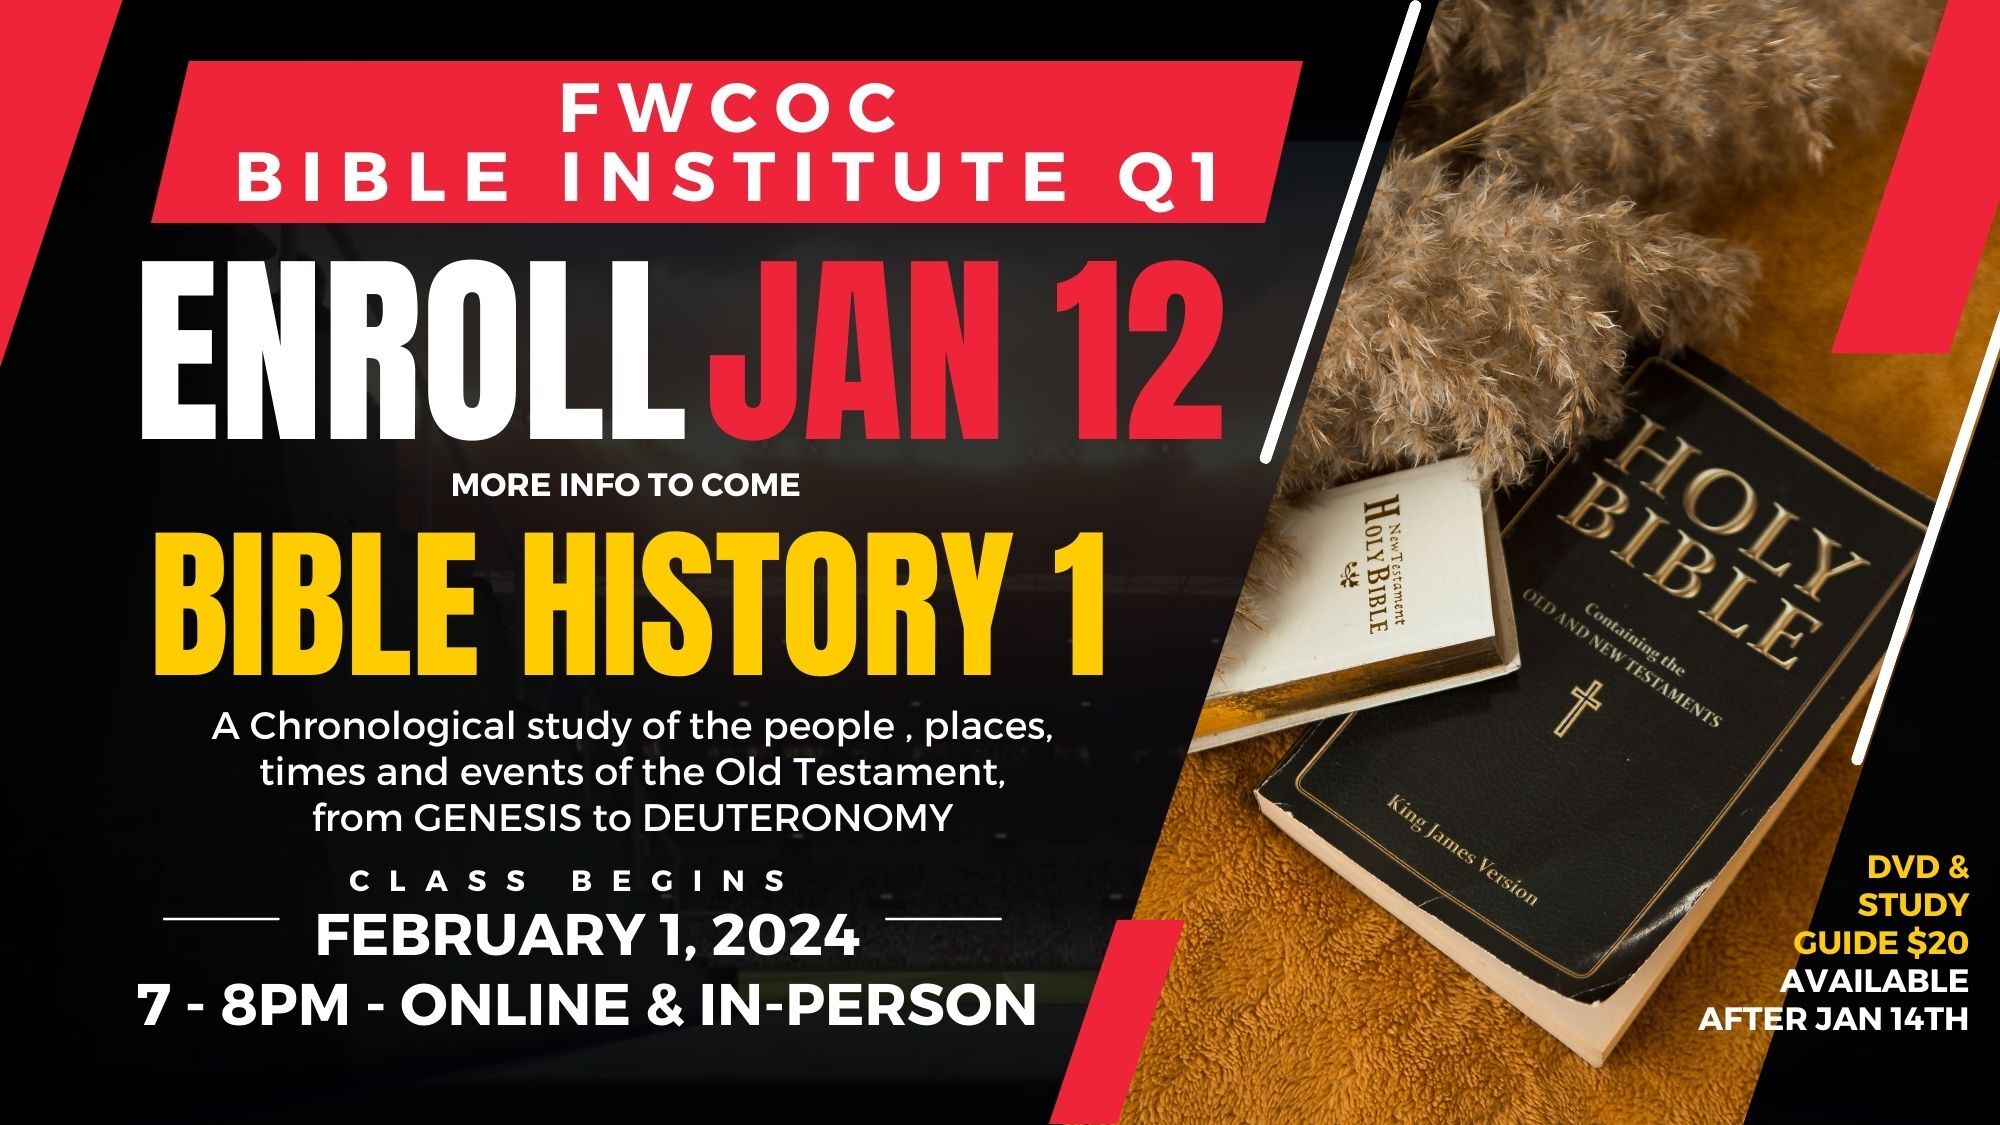 FWCOC Bible Institute - Bible History 1